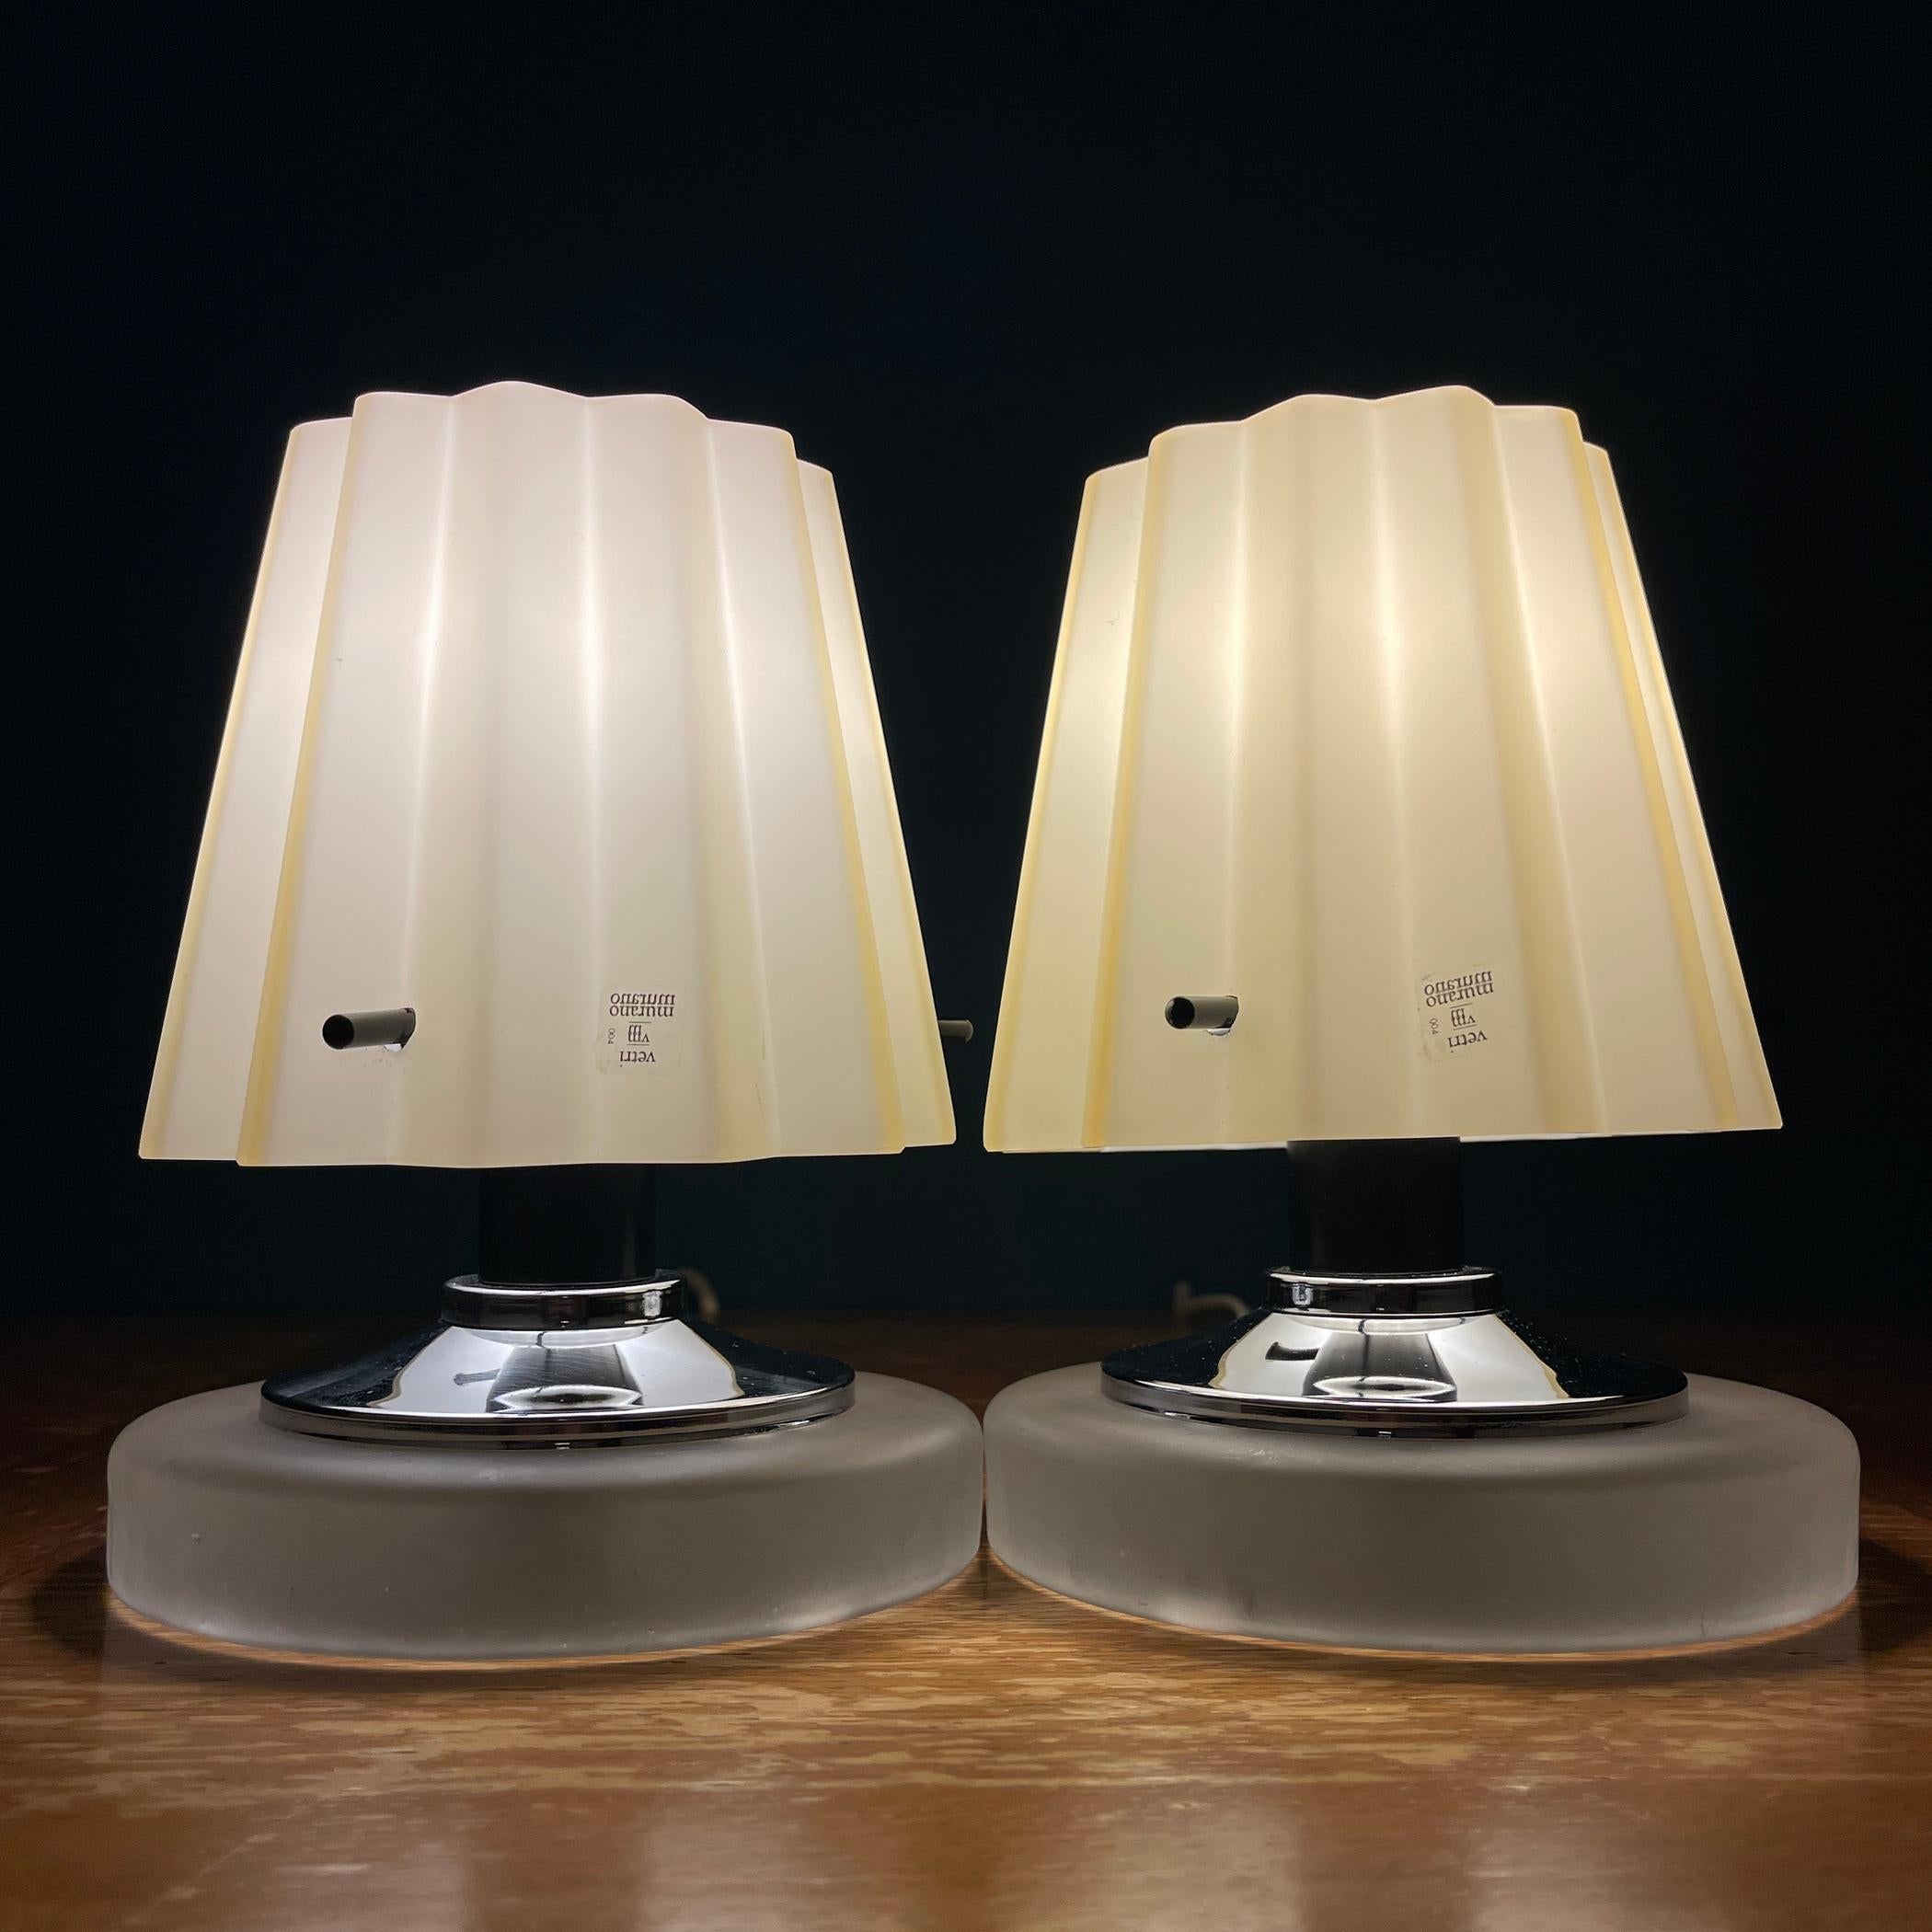 Pair of really beautiful Murano glass night lights Vetri Murano made in Italy in the 1980s. Rare and unusual table lamps. They will undoubtedly decorate your home. Shade and base made of Murano glass. In very good vintage condition. Requires E14